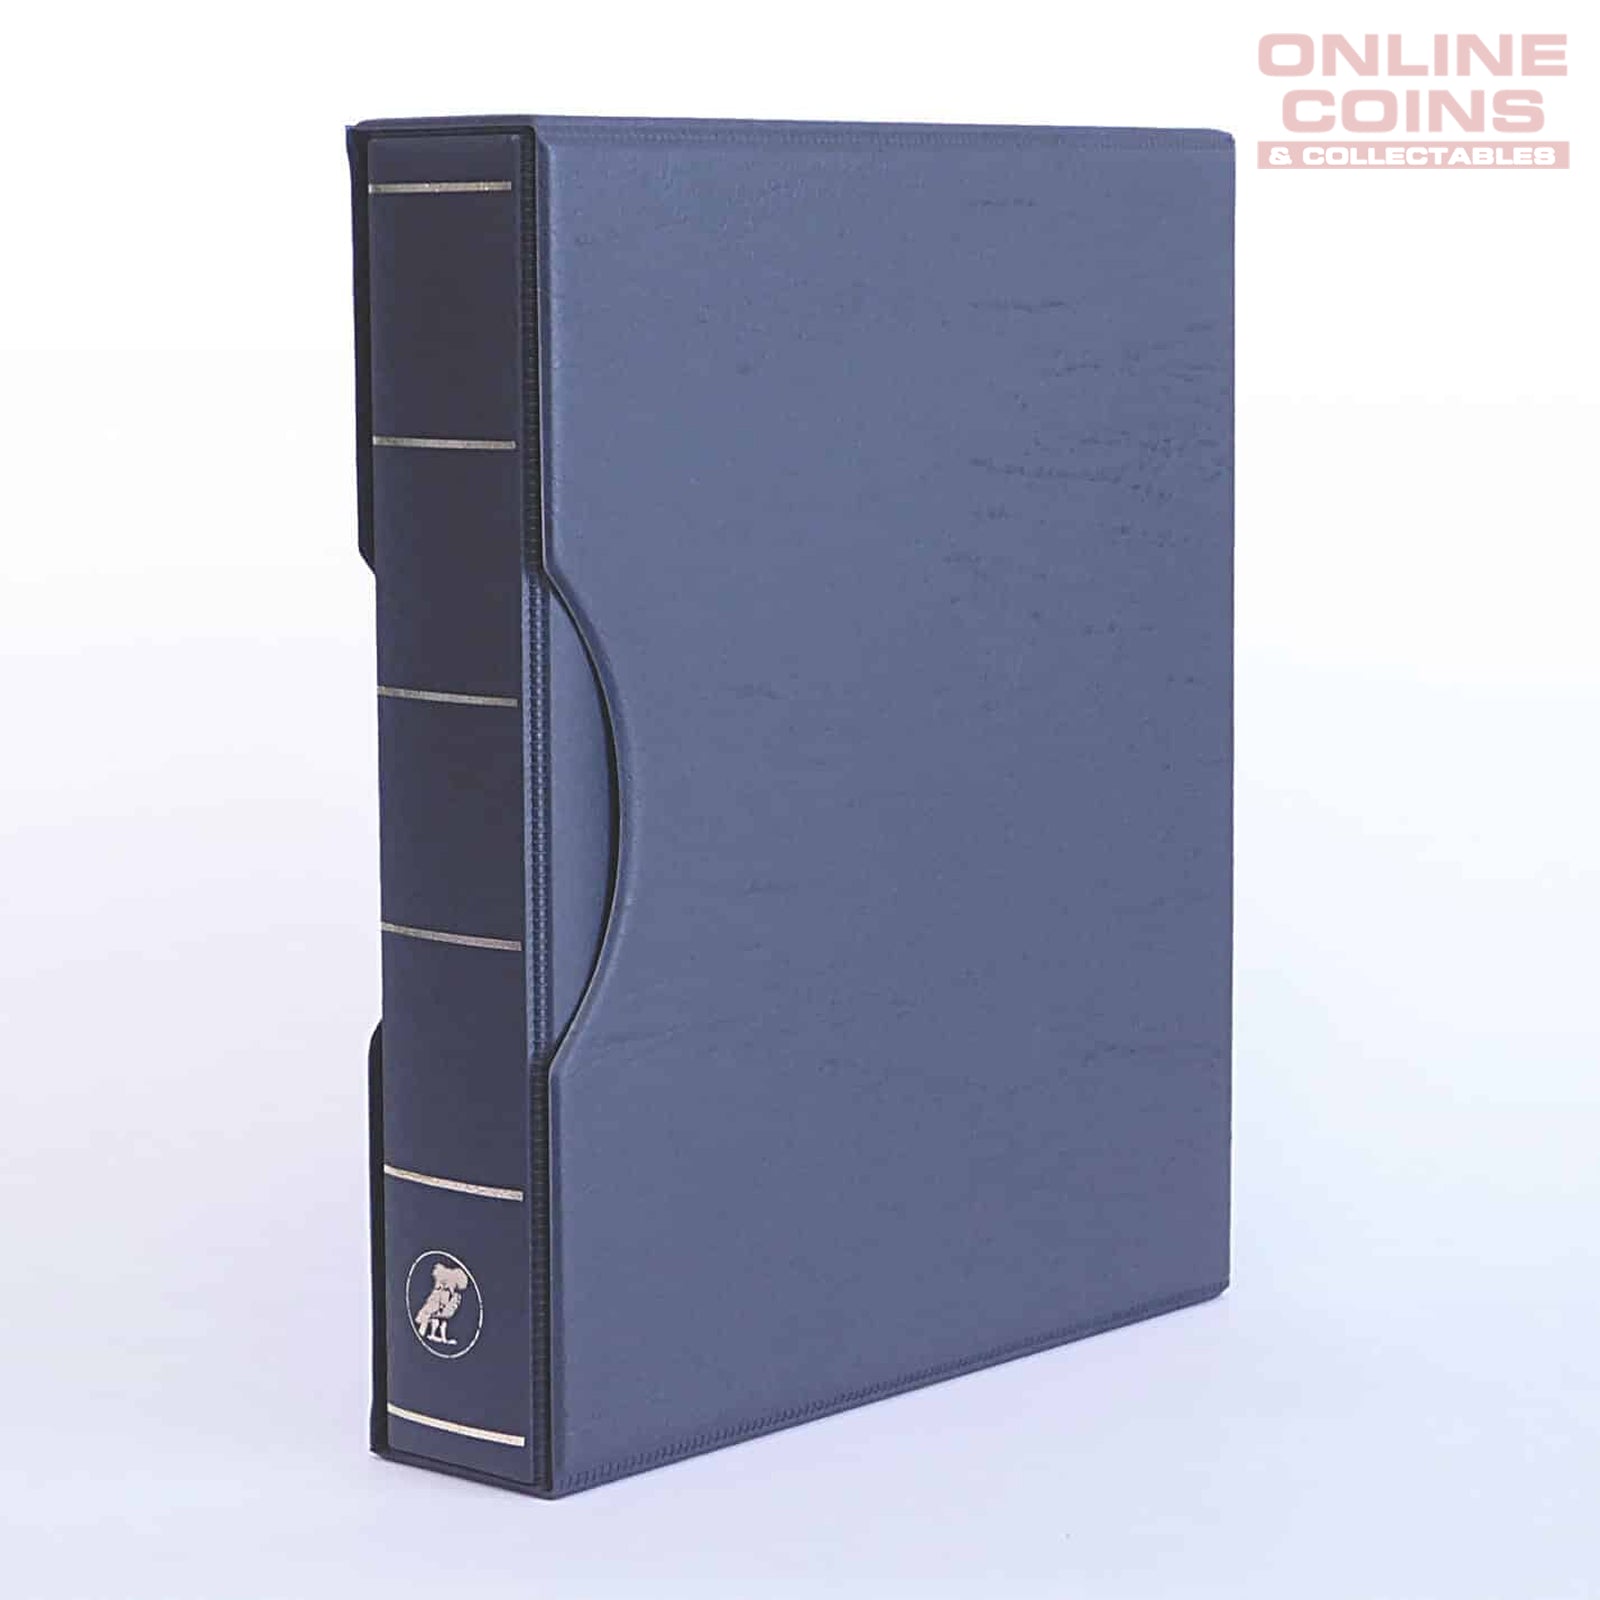 Renniks Binder and Slipcase Black - Album Suitable For Banknotes and Stamps